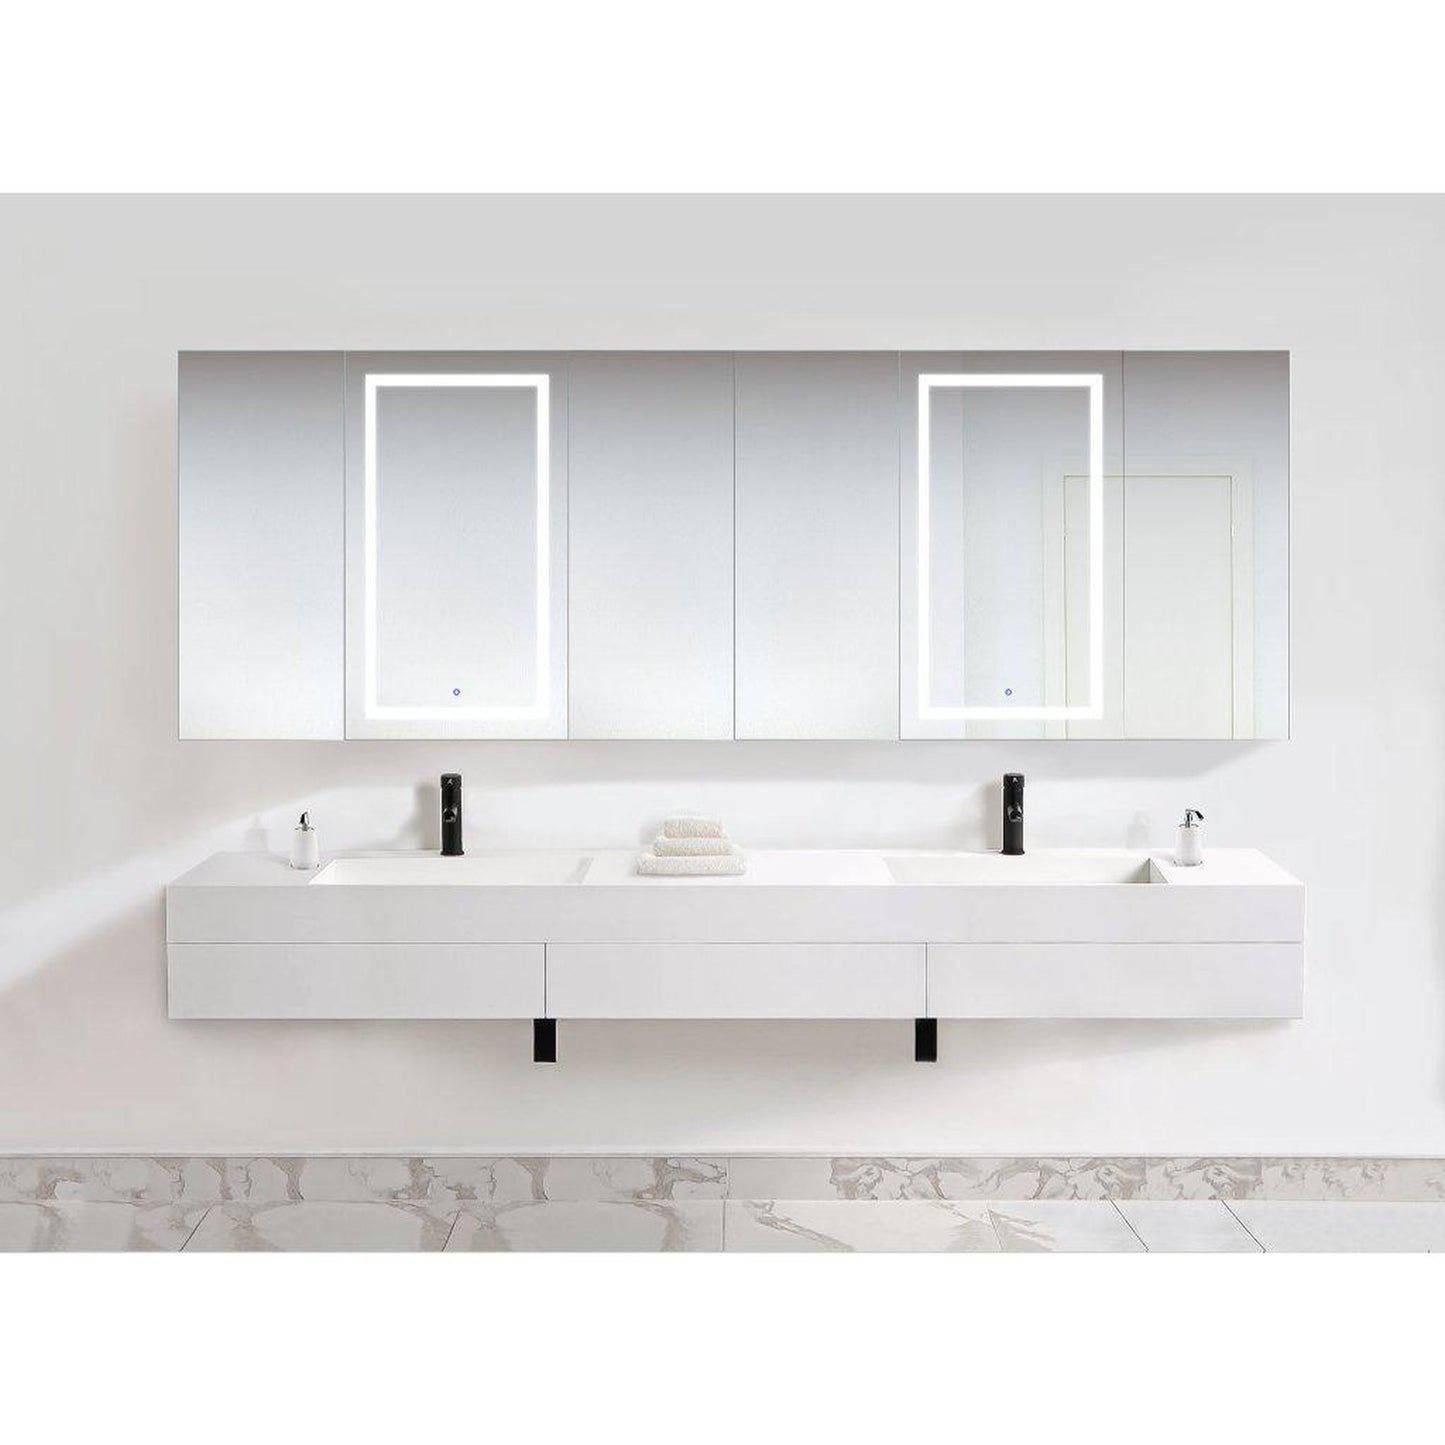 Krugg Reflections Svange 120" x 42" 5000K Double Hexa-View Left-Left-Left-Right-Right-Right Opening Recessed/Surface-Mount Illuminated Silver Backed LED Medicine Cabinet Mirror With Built-in Defogger, Dimmer and Electrical Outlet